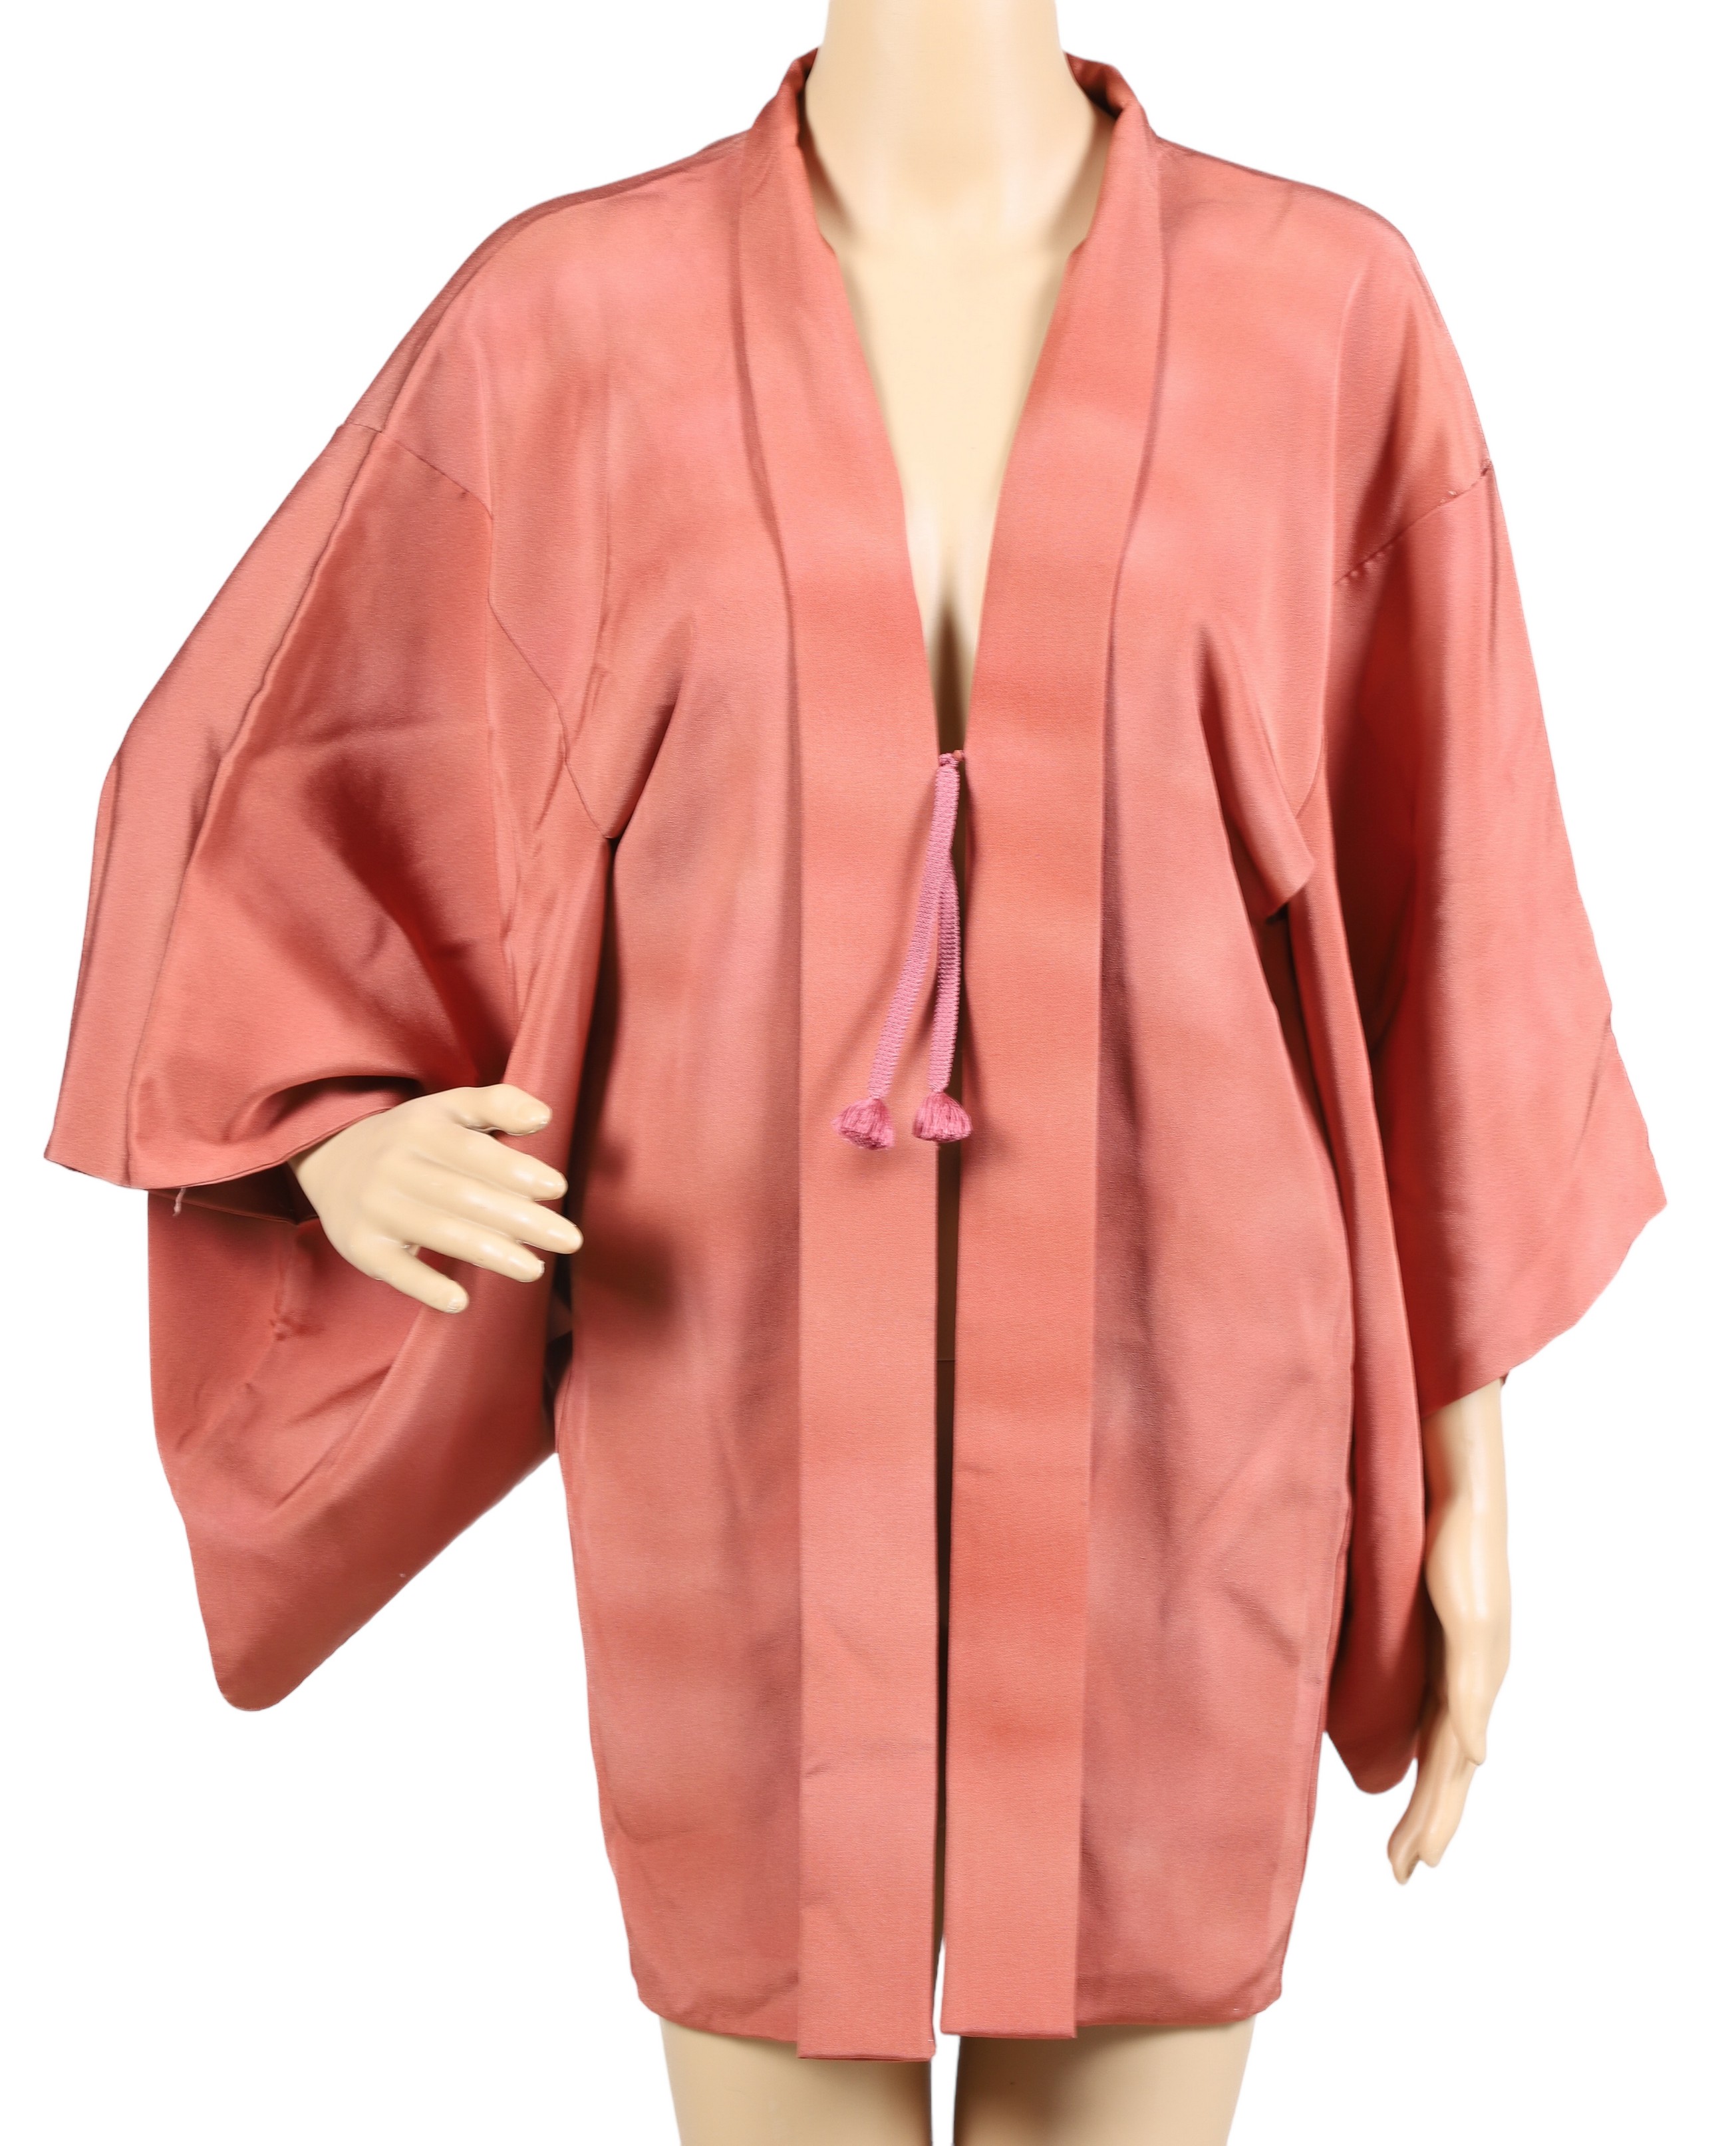 Peach souvenir robe, lined in patterned